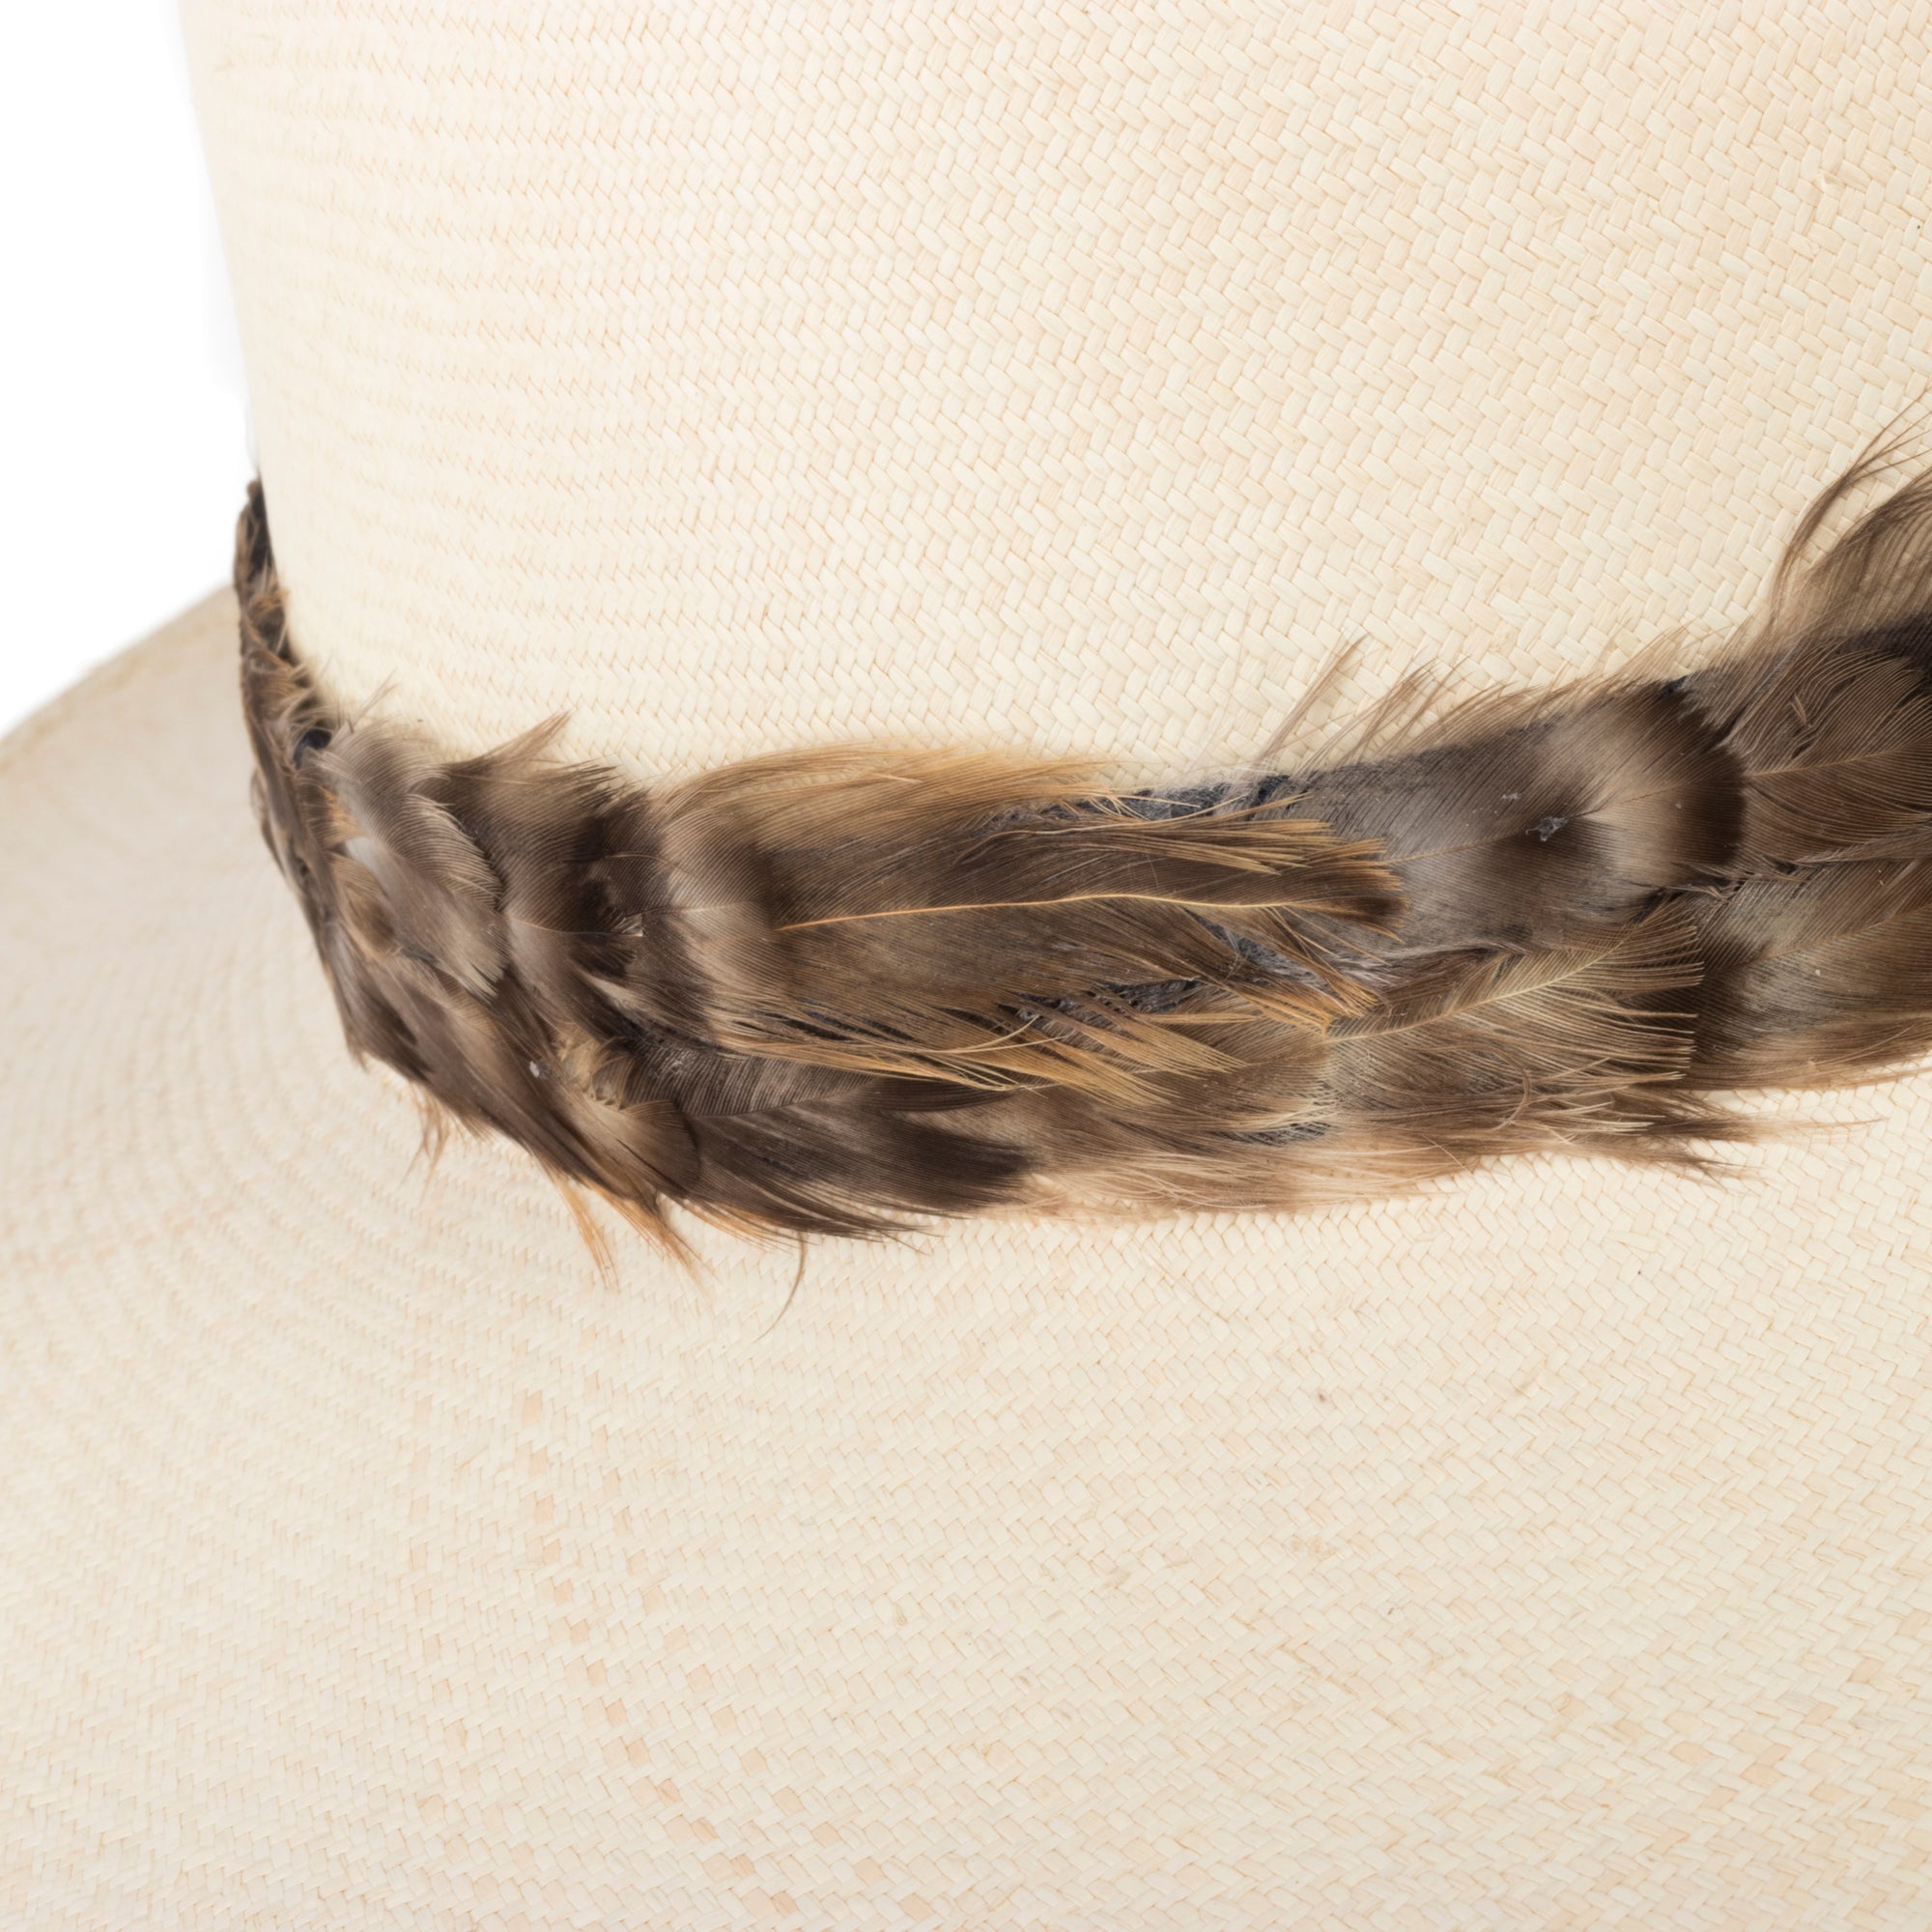 Leather Cord Hat Band With Feathers Hatband: Brown, Black, Grey